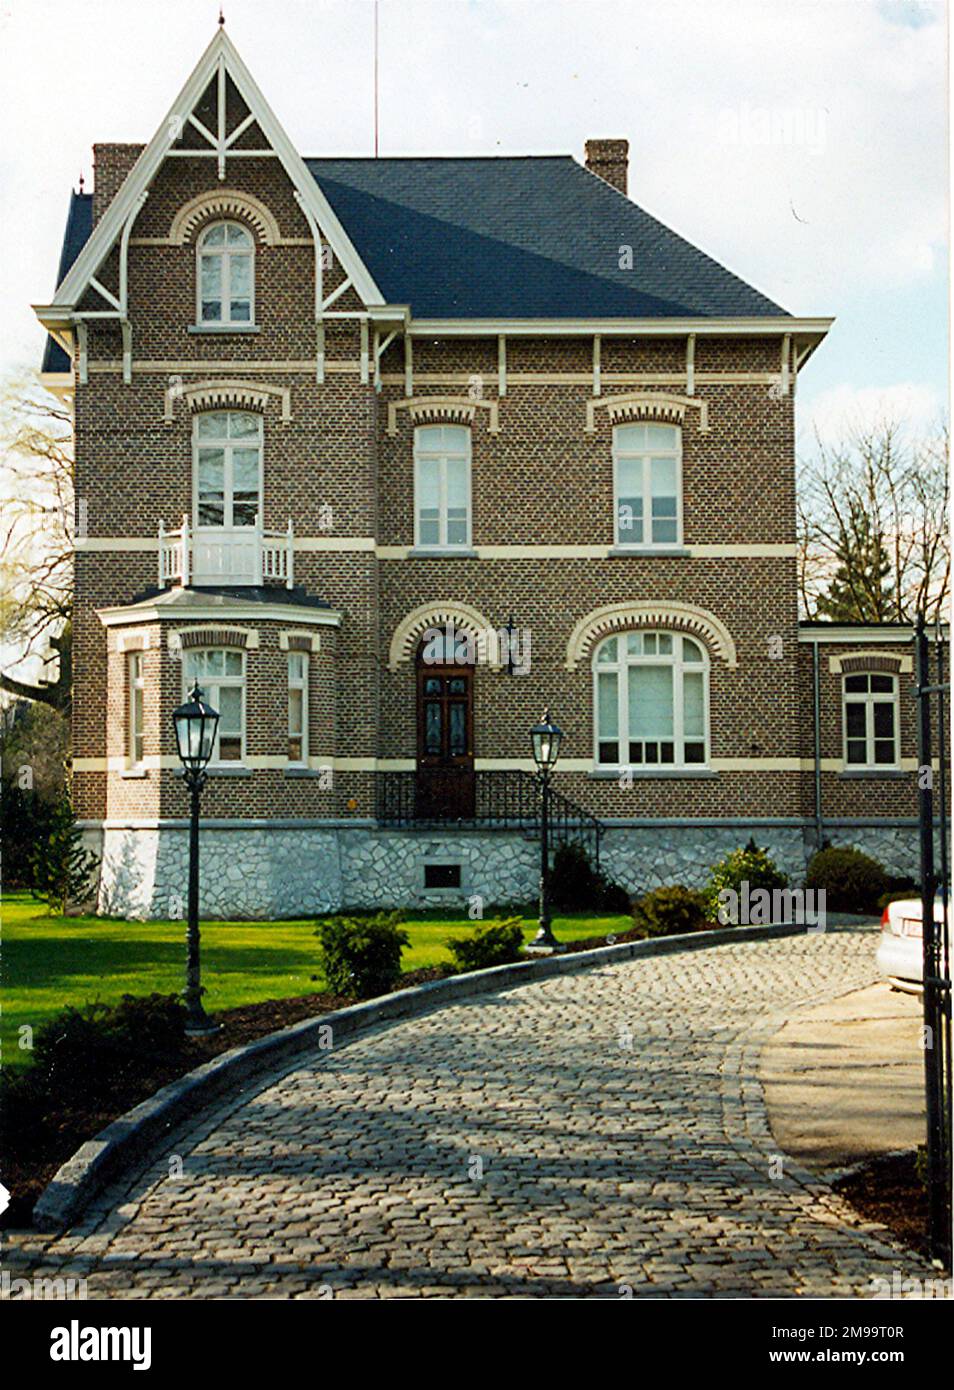 On 9 September 1944 Zonhoven was liberated by the Allies, and from 12 November to 7 February 1945 Montgomery made his HQ here in the home of the local physician, Dr Armand Peeters. It was called 'Villa Magda' and shows a bronze plaque just inside the railings at the entrance which commemorates the Field-Marshal's stay and the fact that his cocker-spaniel named 'Rommel', died here. The animal had been Monty's faithful companion from Normandy to Holland but had been run over on 18th December 1944 and was buried in the garden. The white headstone marking the grave has been stolen. General Eisen Stock Photo